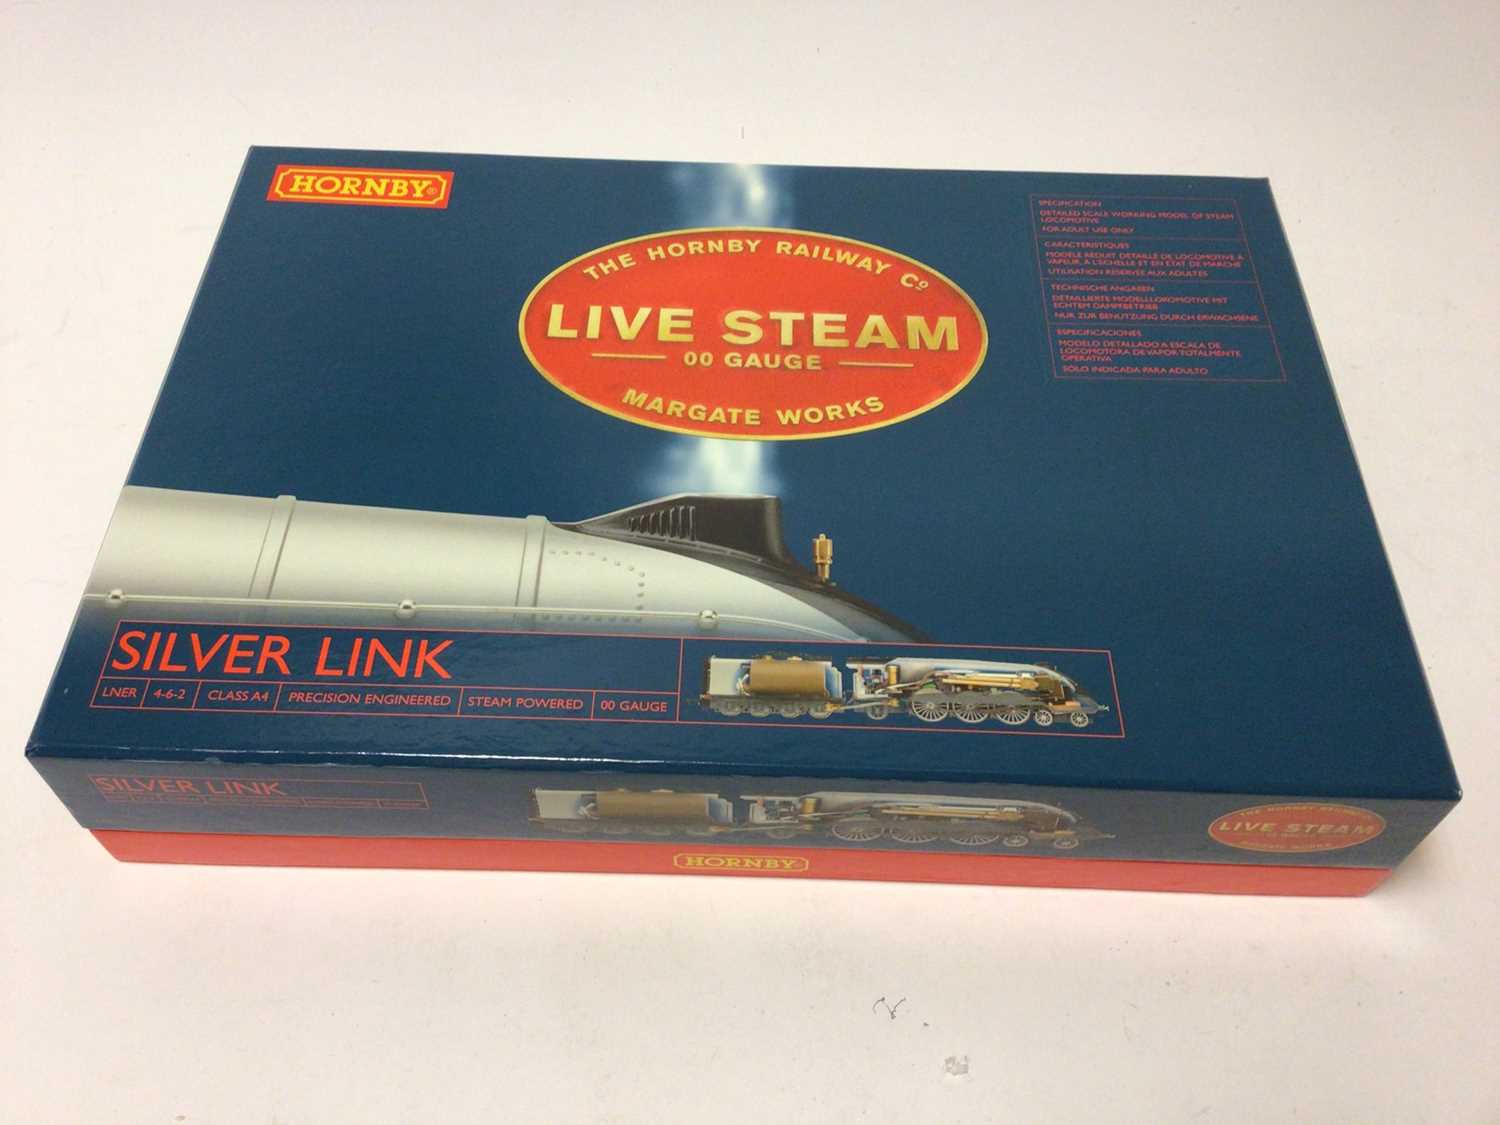 Lot 237 - Hornby OO gauge 4-6-2 Class A4 precision engineered LNER Mallard "Silver Link" live steam powered locomotive and tender, boxed, R2367